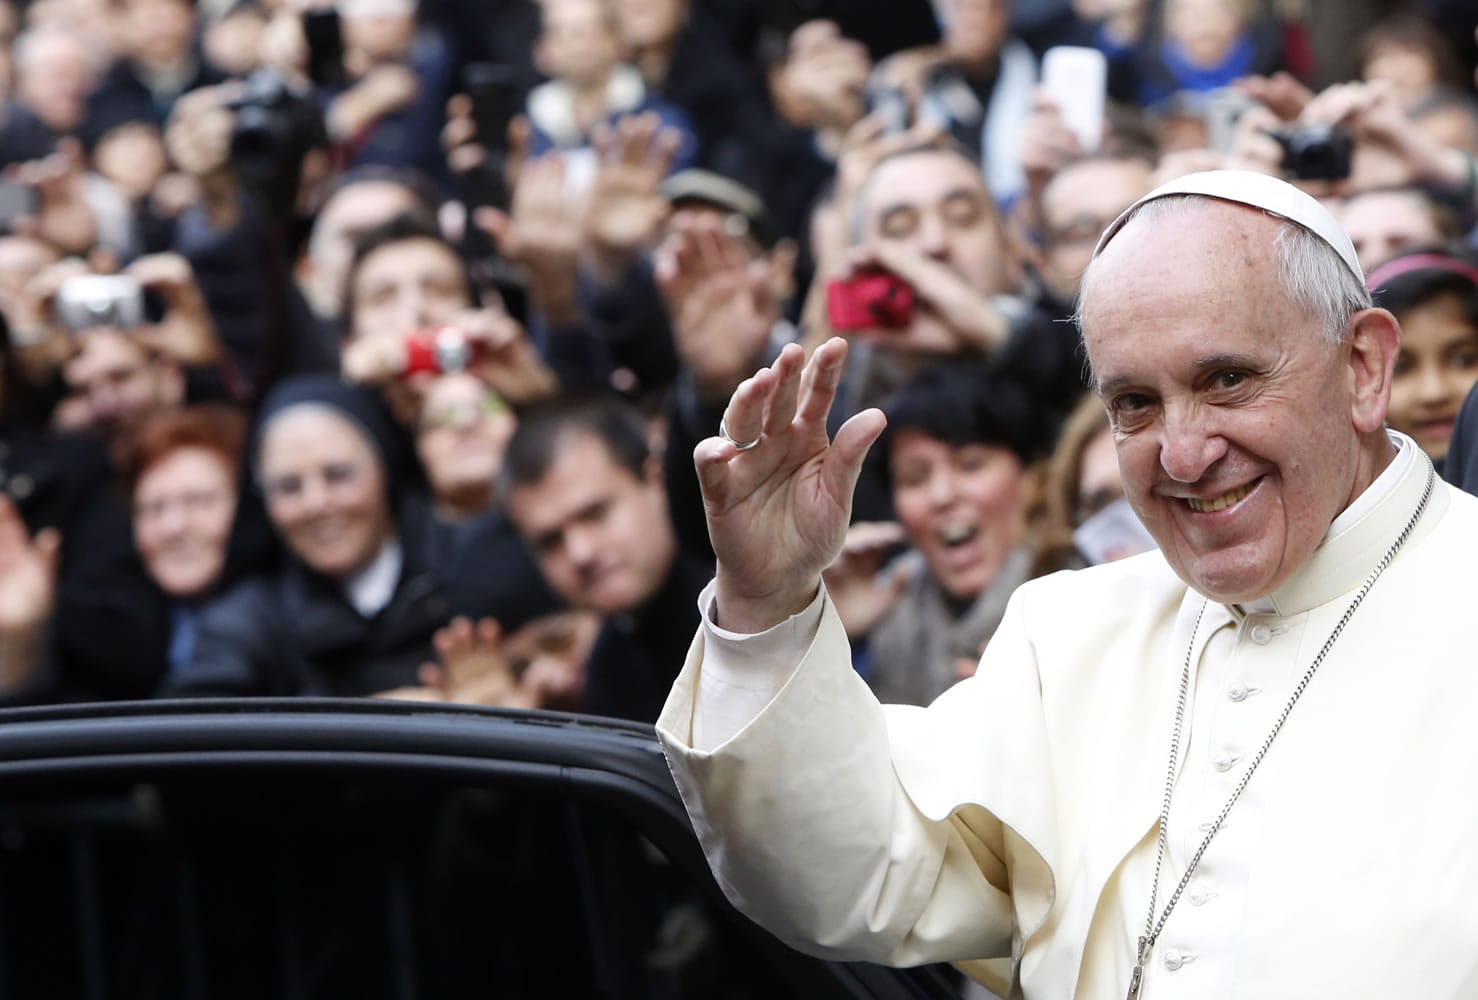 Pope Francis waves as he leaves Rome's Jesus' Church to celebrate a mass with the Jesuits, on the occasion of the order's titular feast Friday.